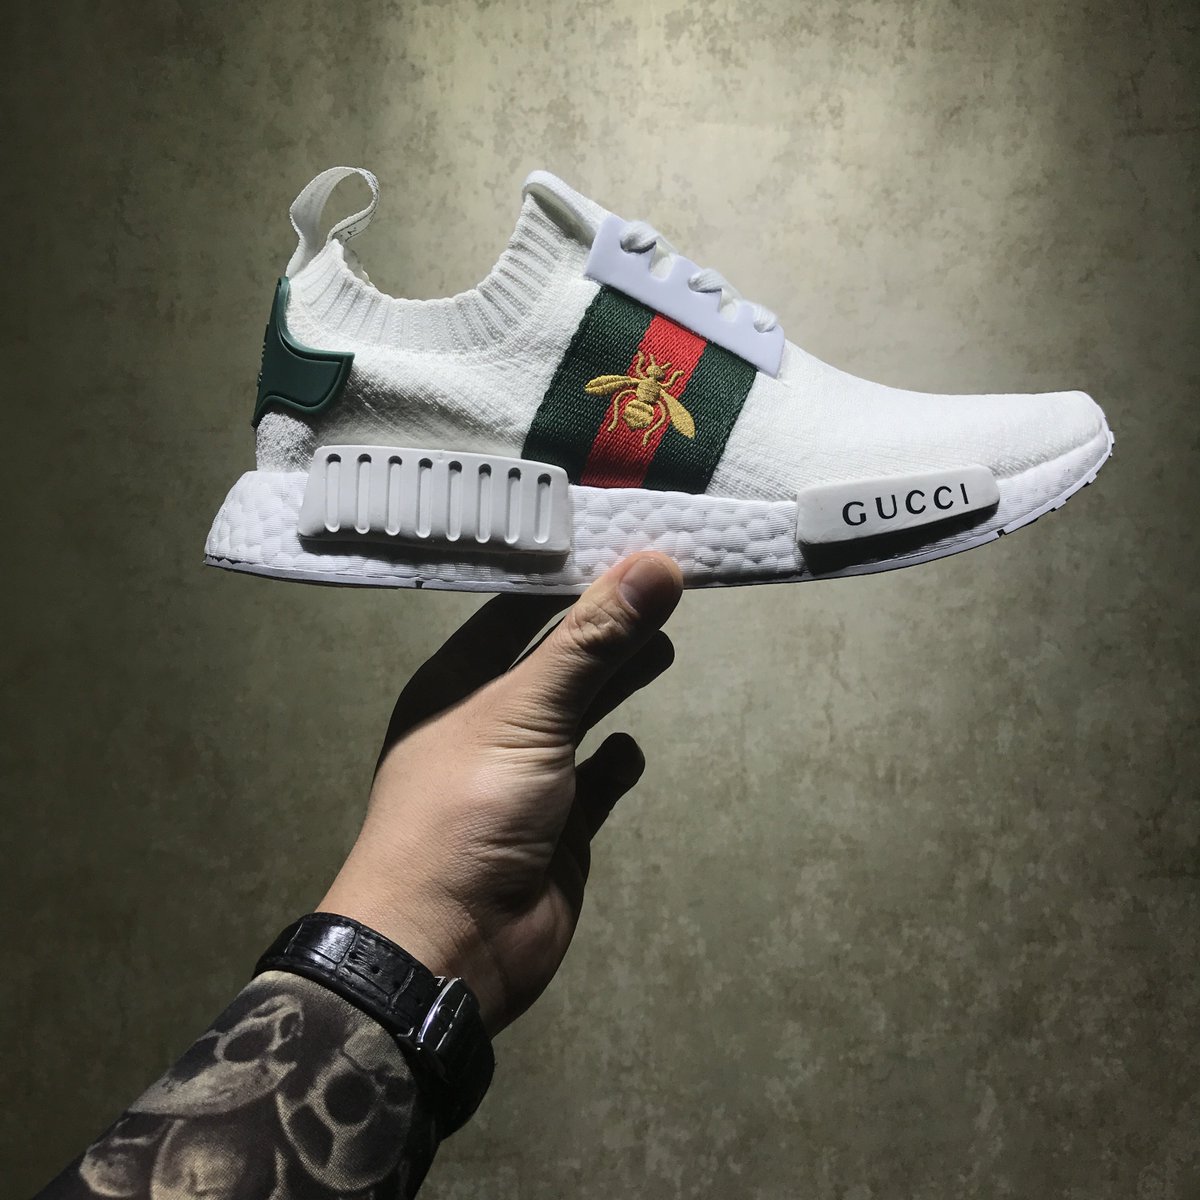 Adidas NMD white x Gucci Men Shoes Nmd white NMD R1 Gucci